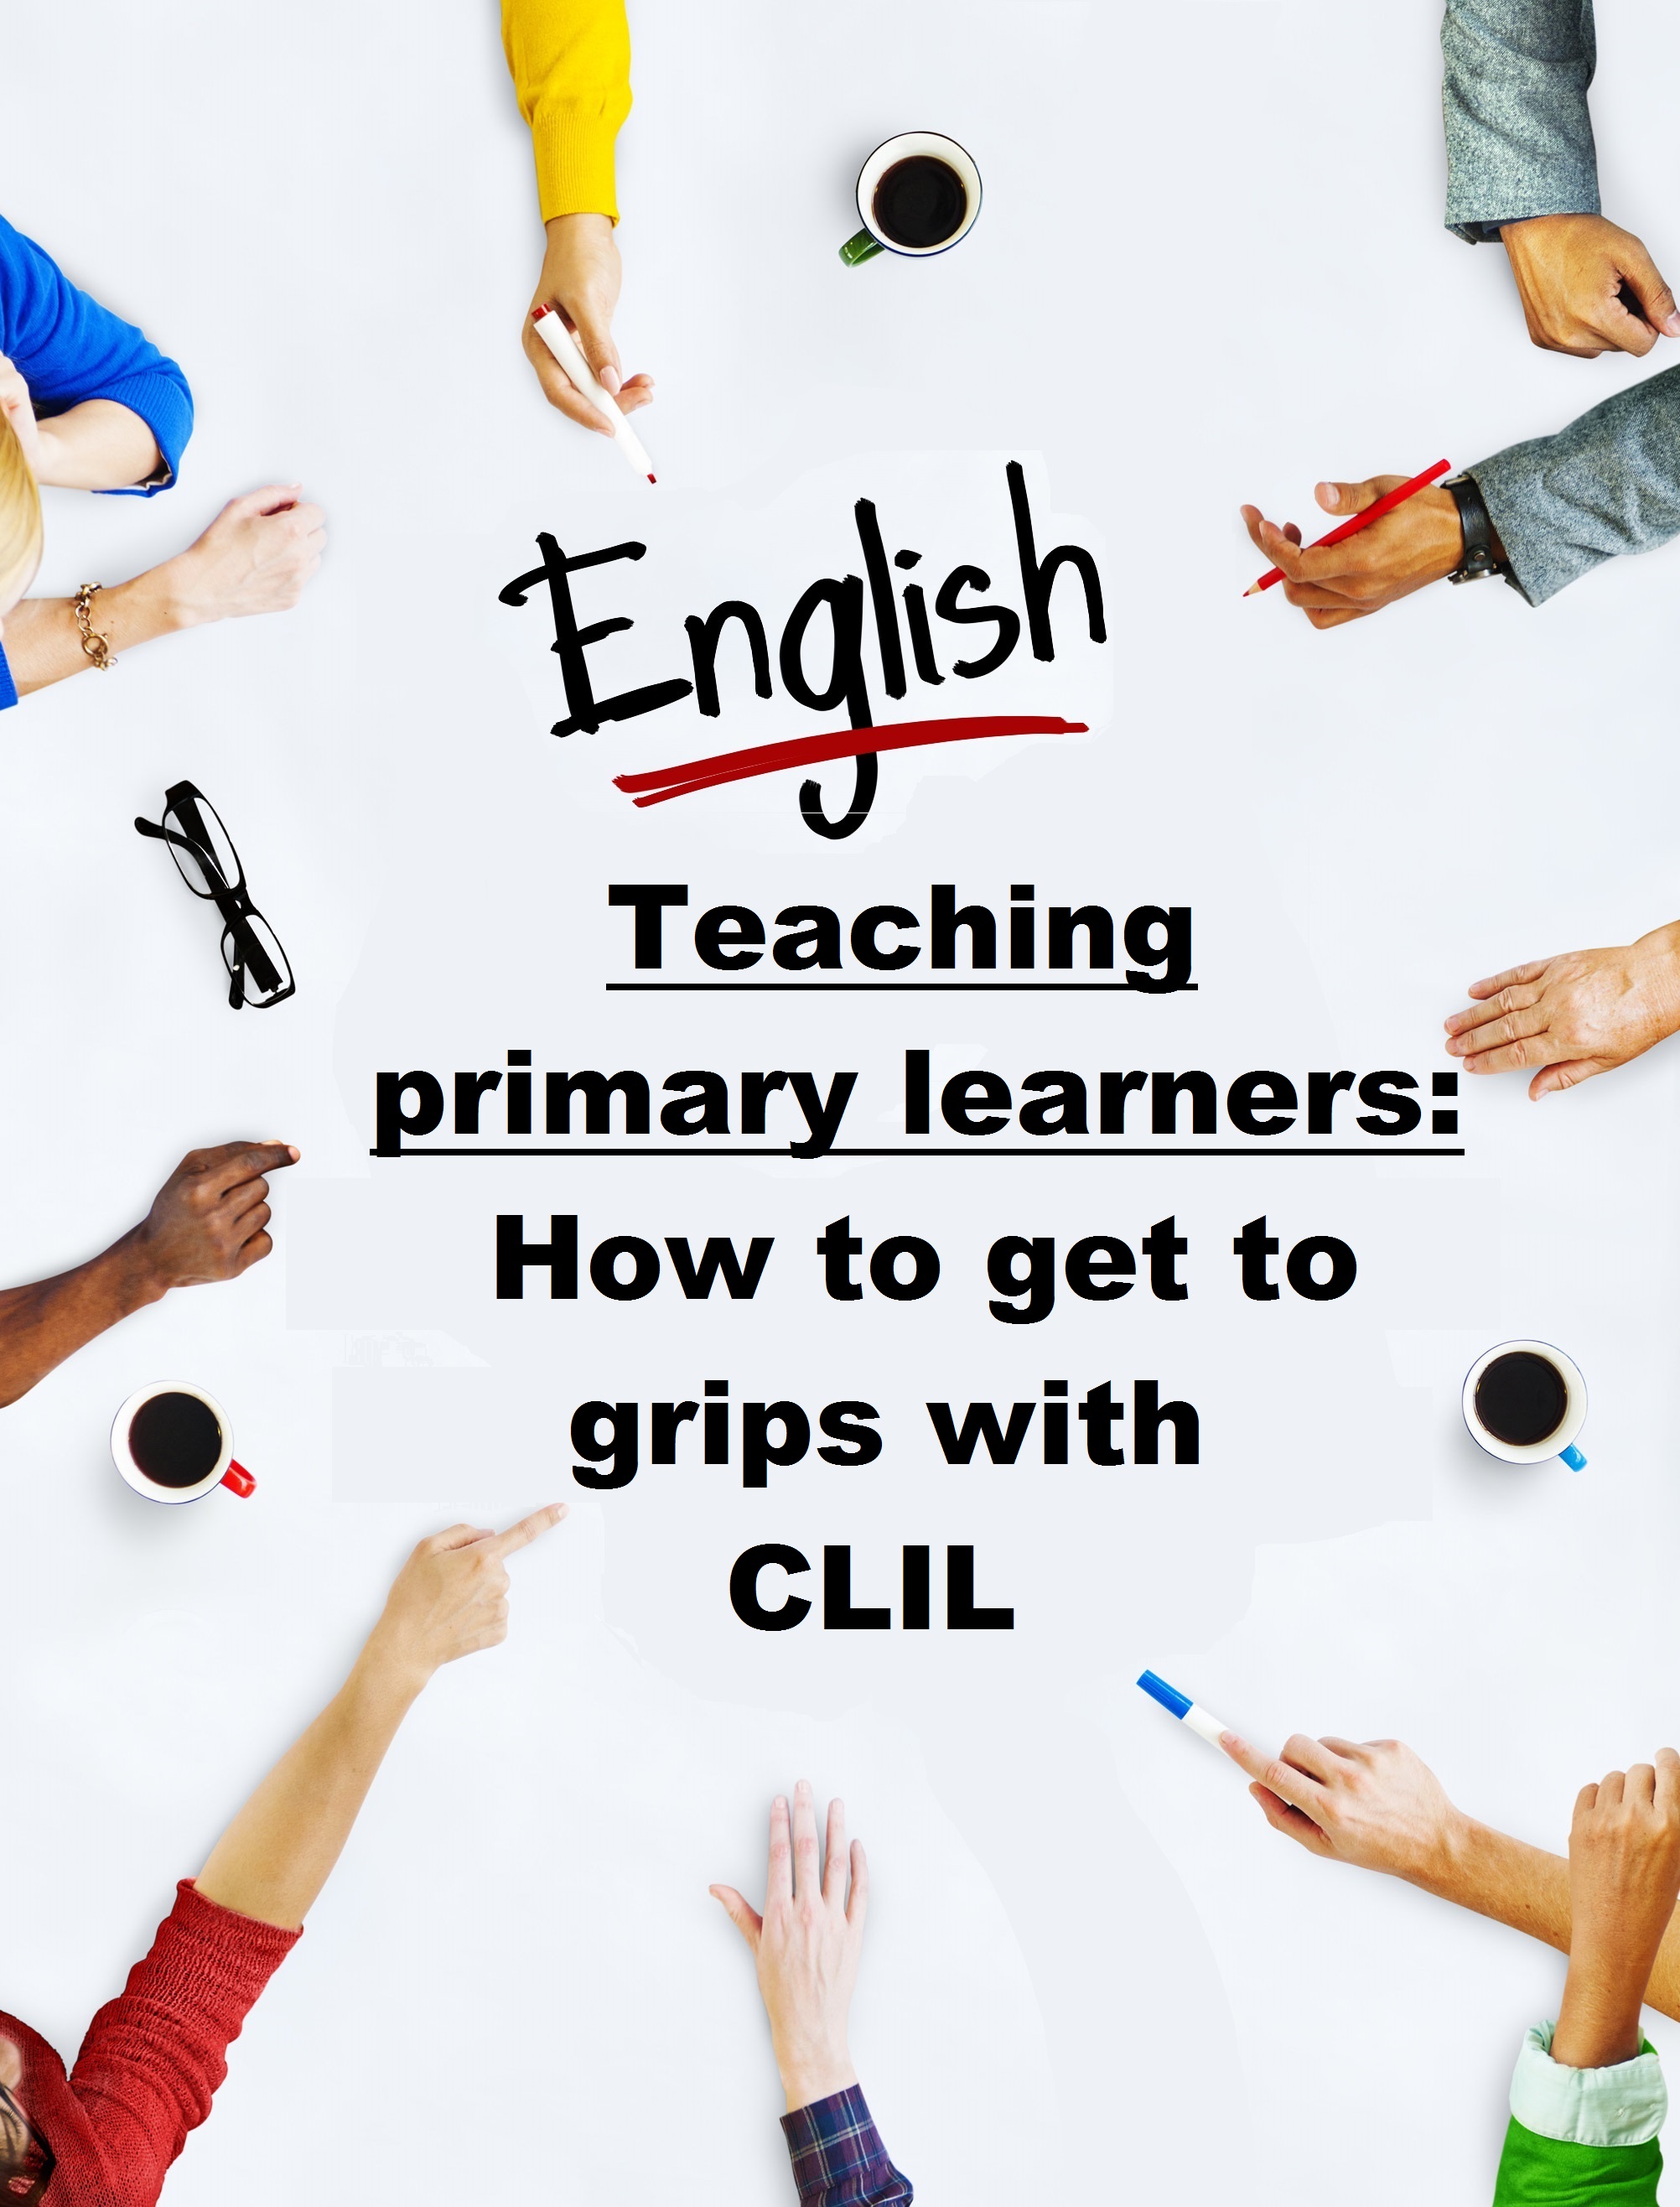 Запись вебинара "Teaching primary learners: How to get to grips with CLIL"